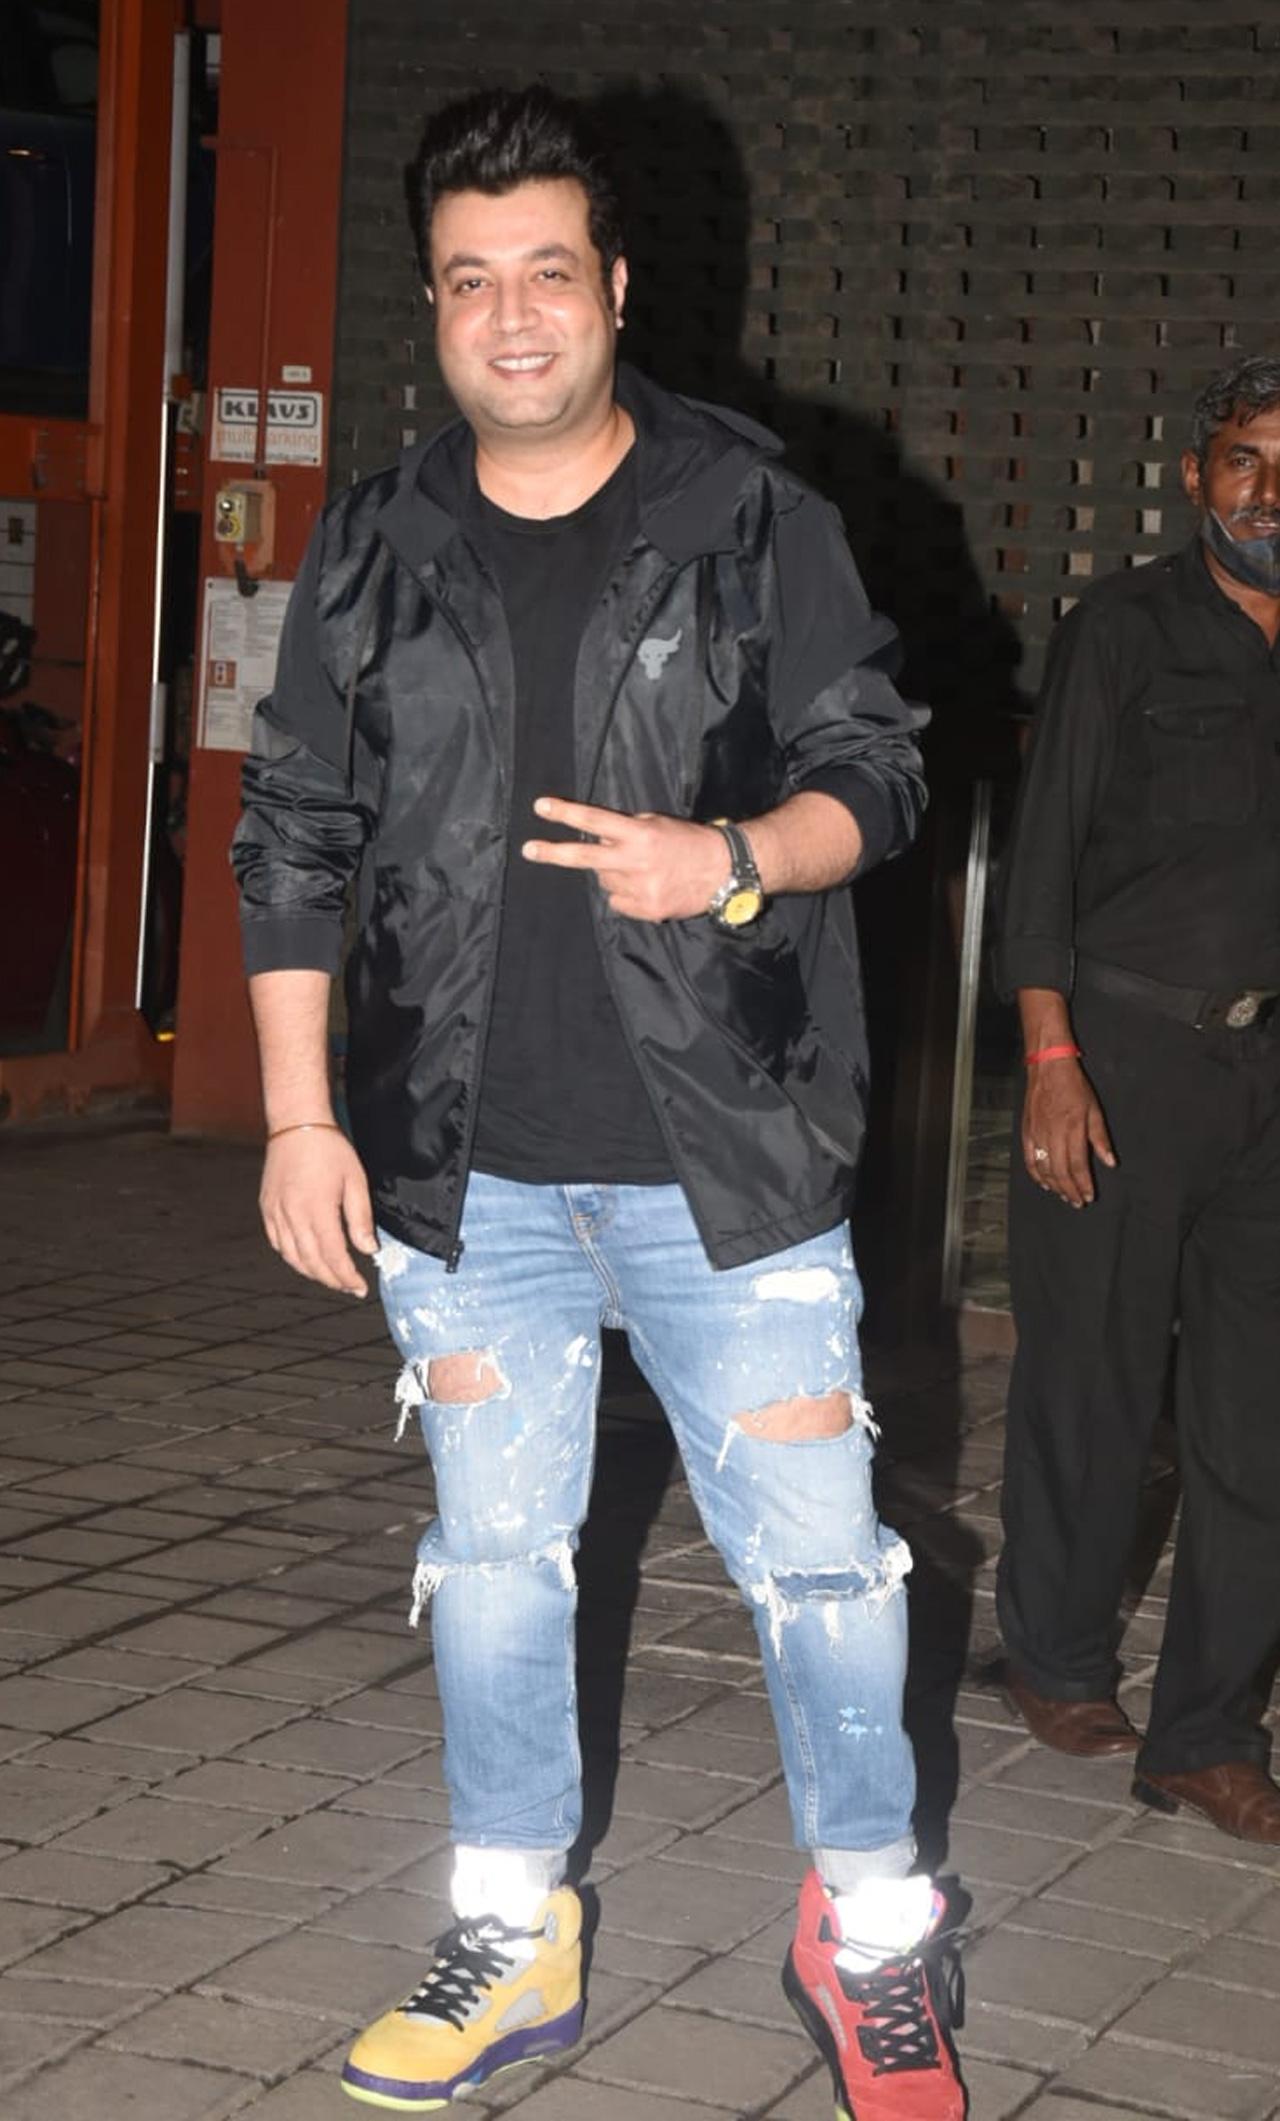 Varun Sharma of Fukrey fame also made an appearance for Arpita Khan and Aayush Sharma’s wedding anniversary celebrations. He happily posed for the shutterbugs before proceeding toward what must have felt like one crazy night. Don't miss hs mismatched shoes that have just been launched in the market.




